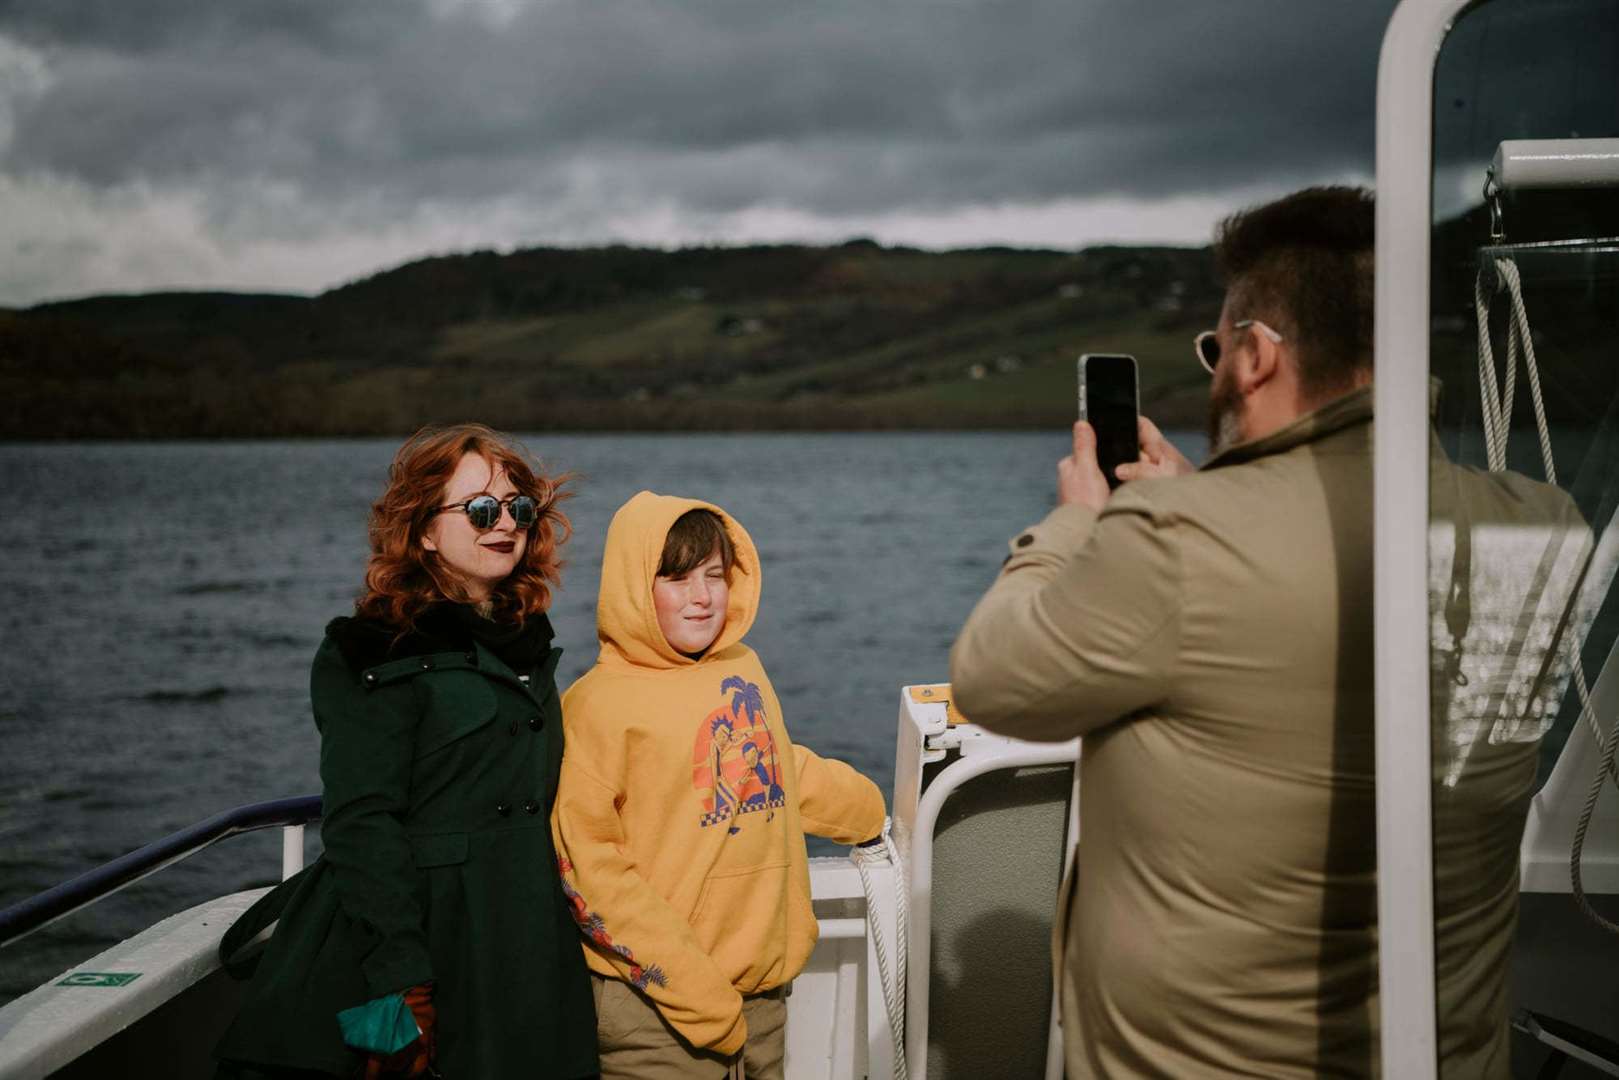 Snapshots from the boat with Lisa Urquhart, her son Sonny and Stephen Price. Picture by: Michael Carver Photography.